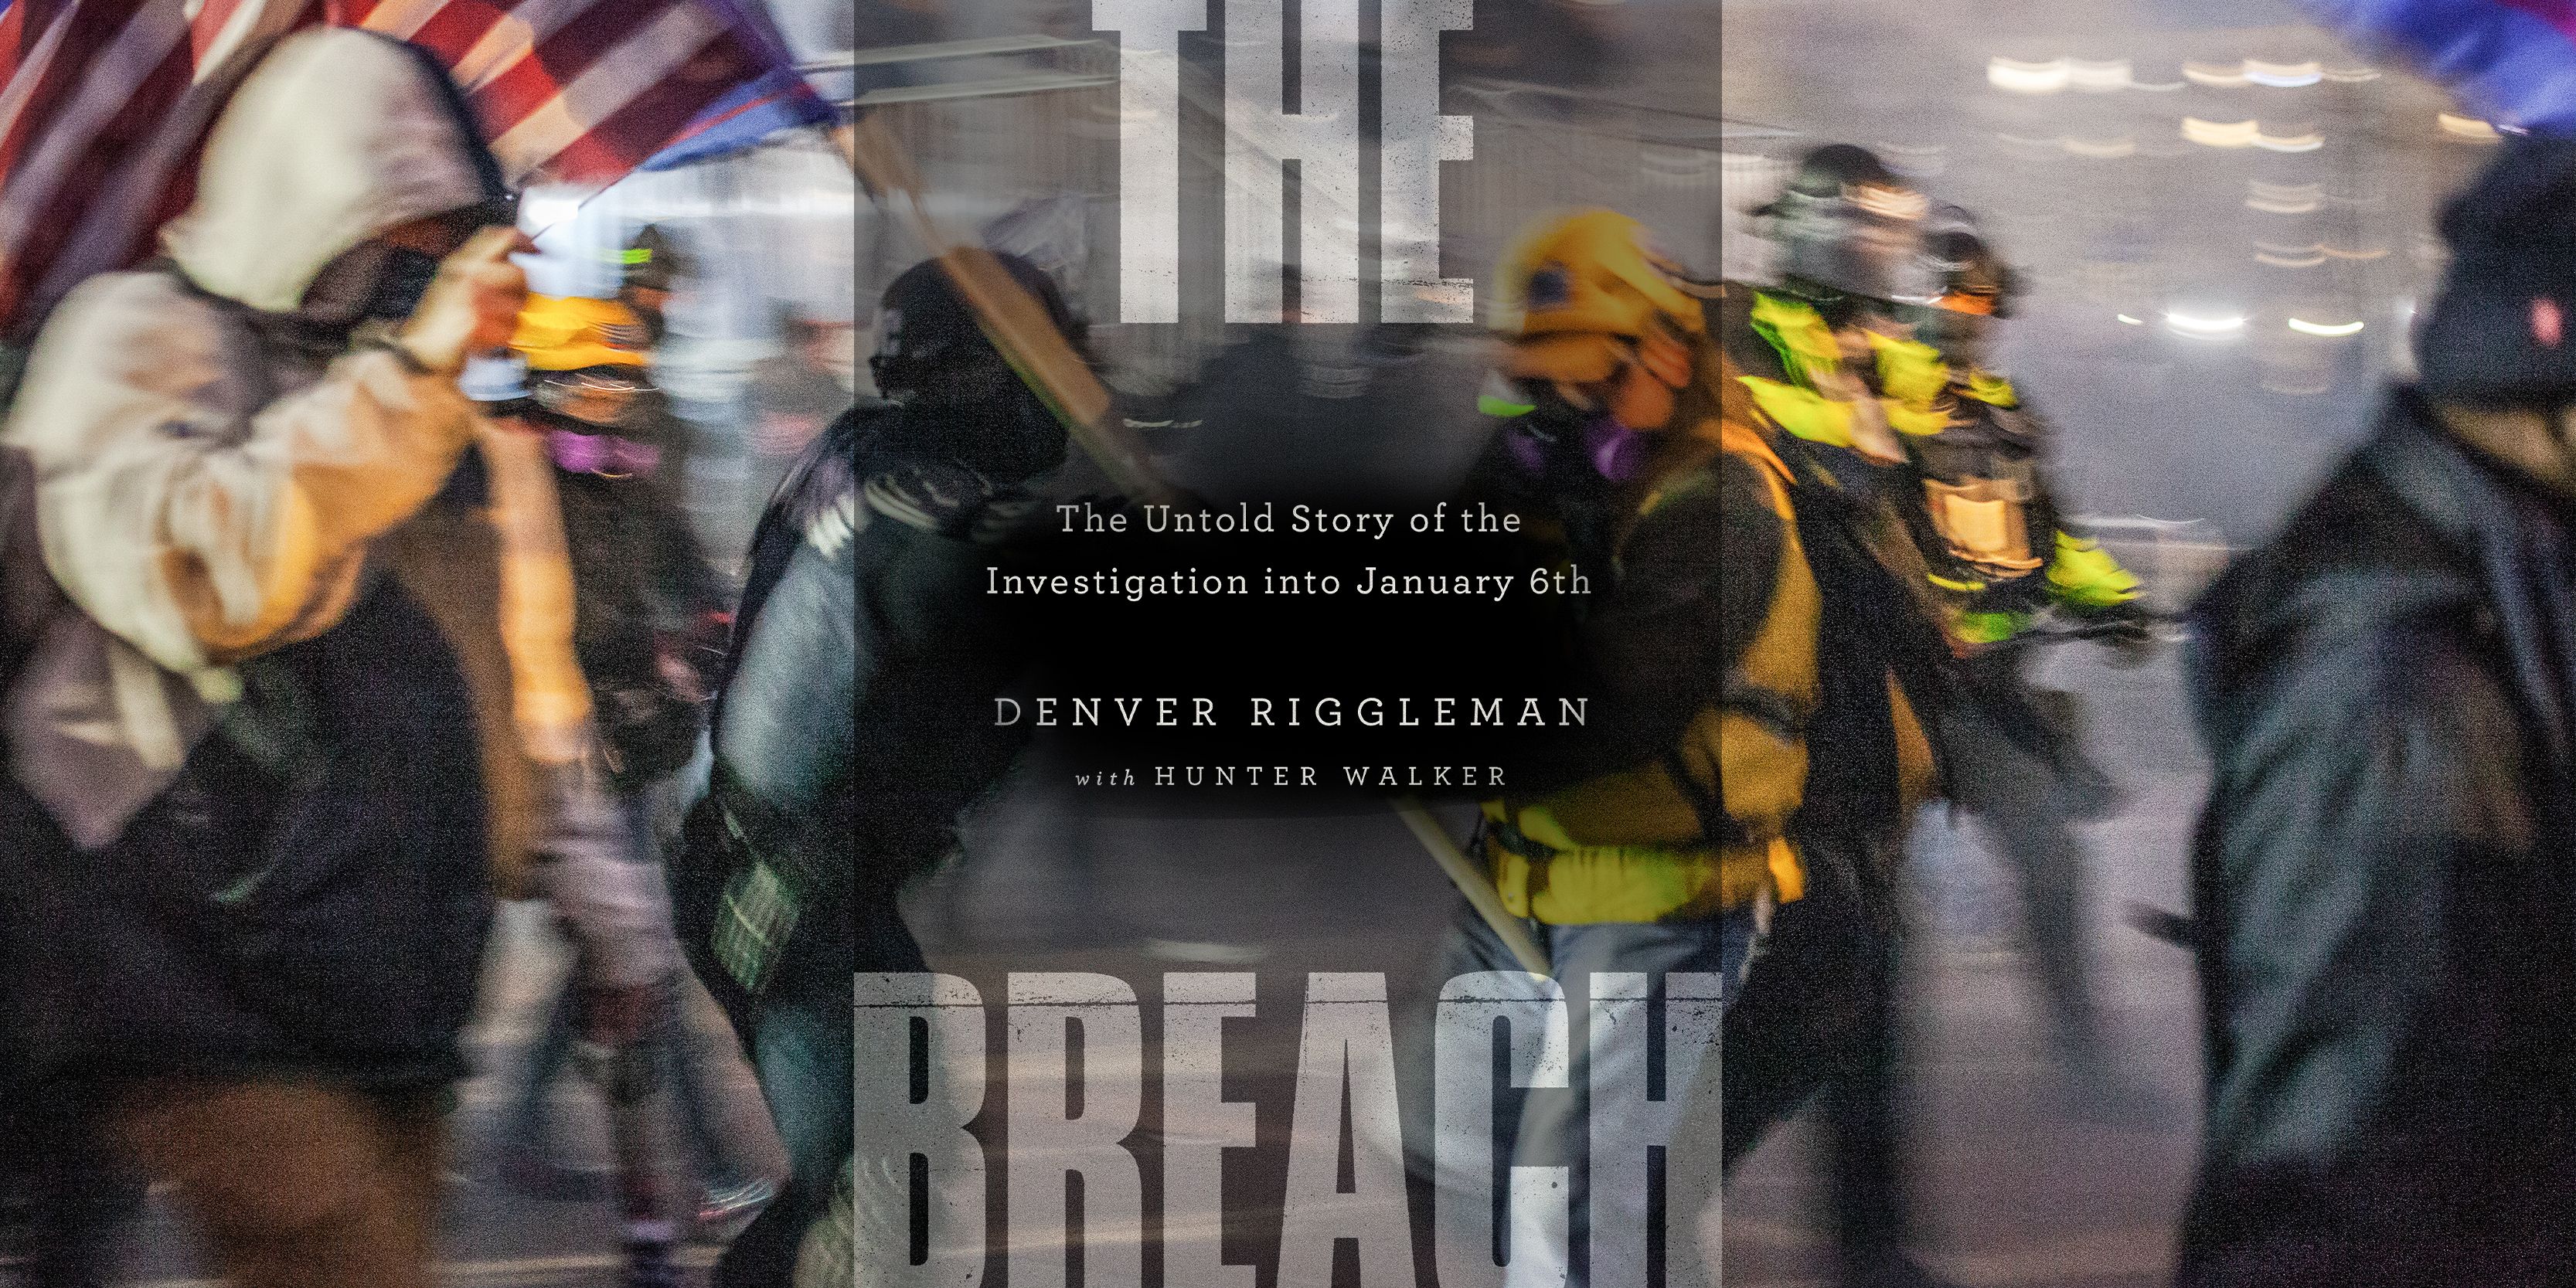 The Breach: The Untold Story of the Investigation Into January 6th